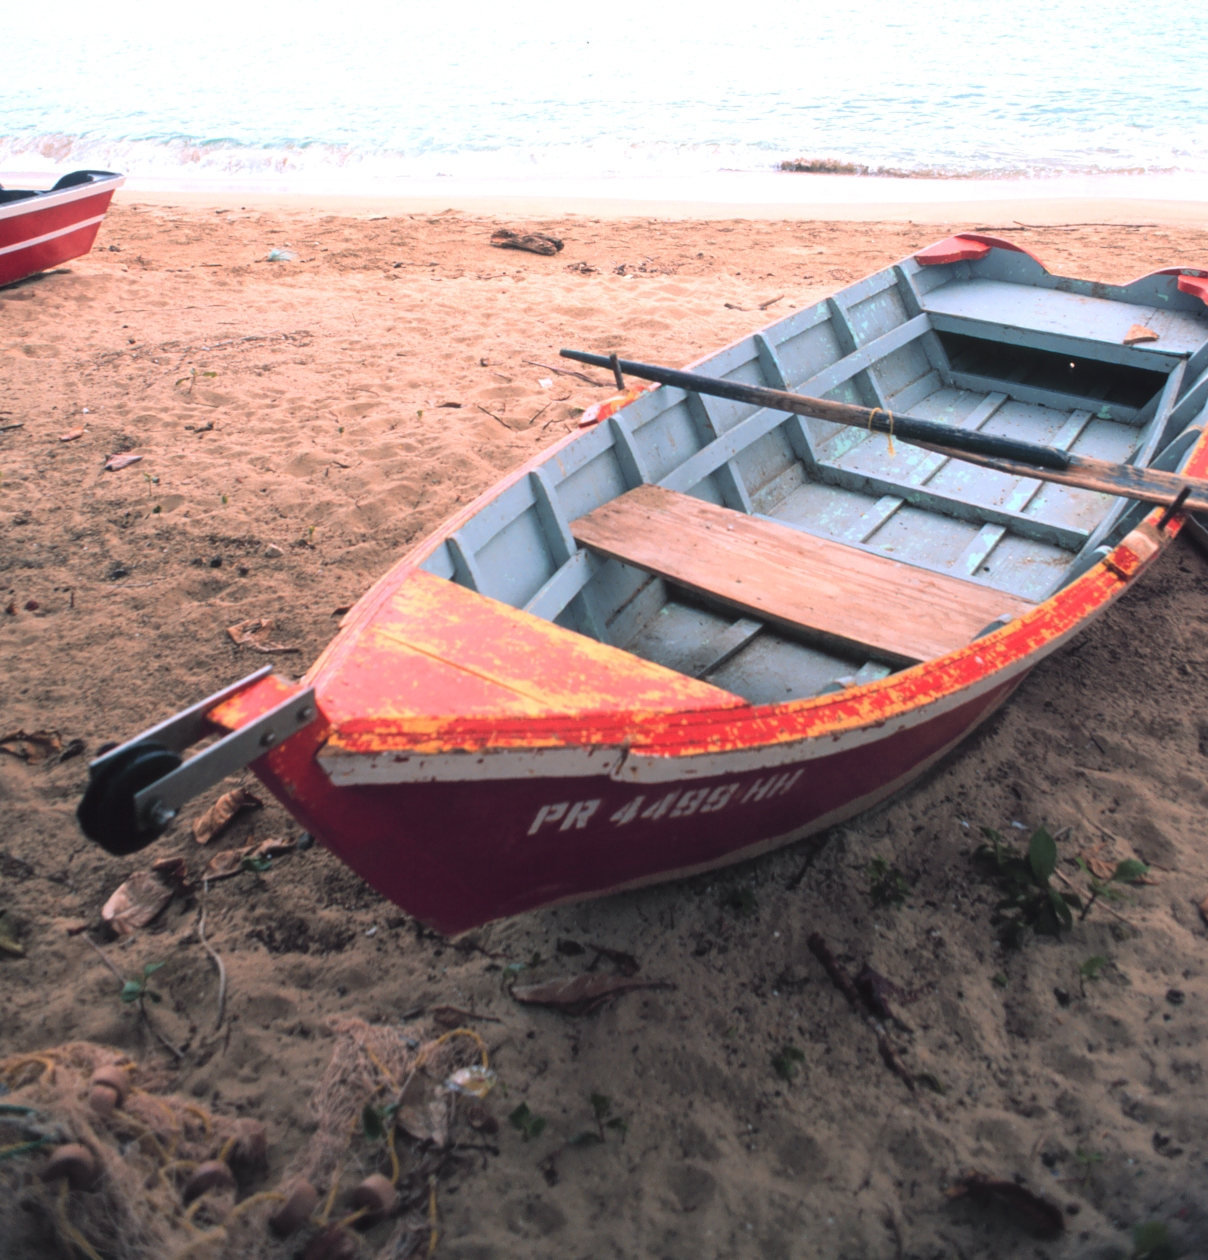 Small scale fishing boats on the beach